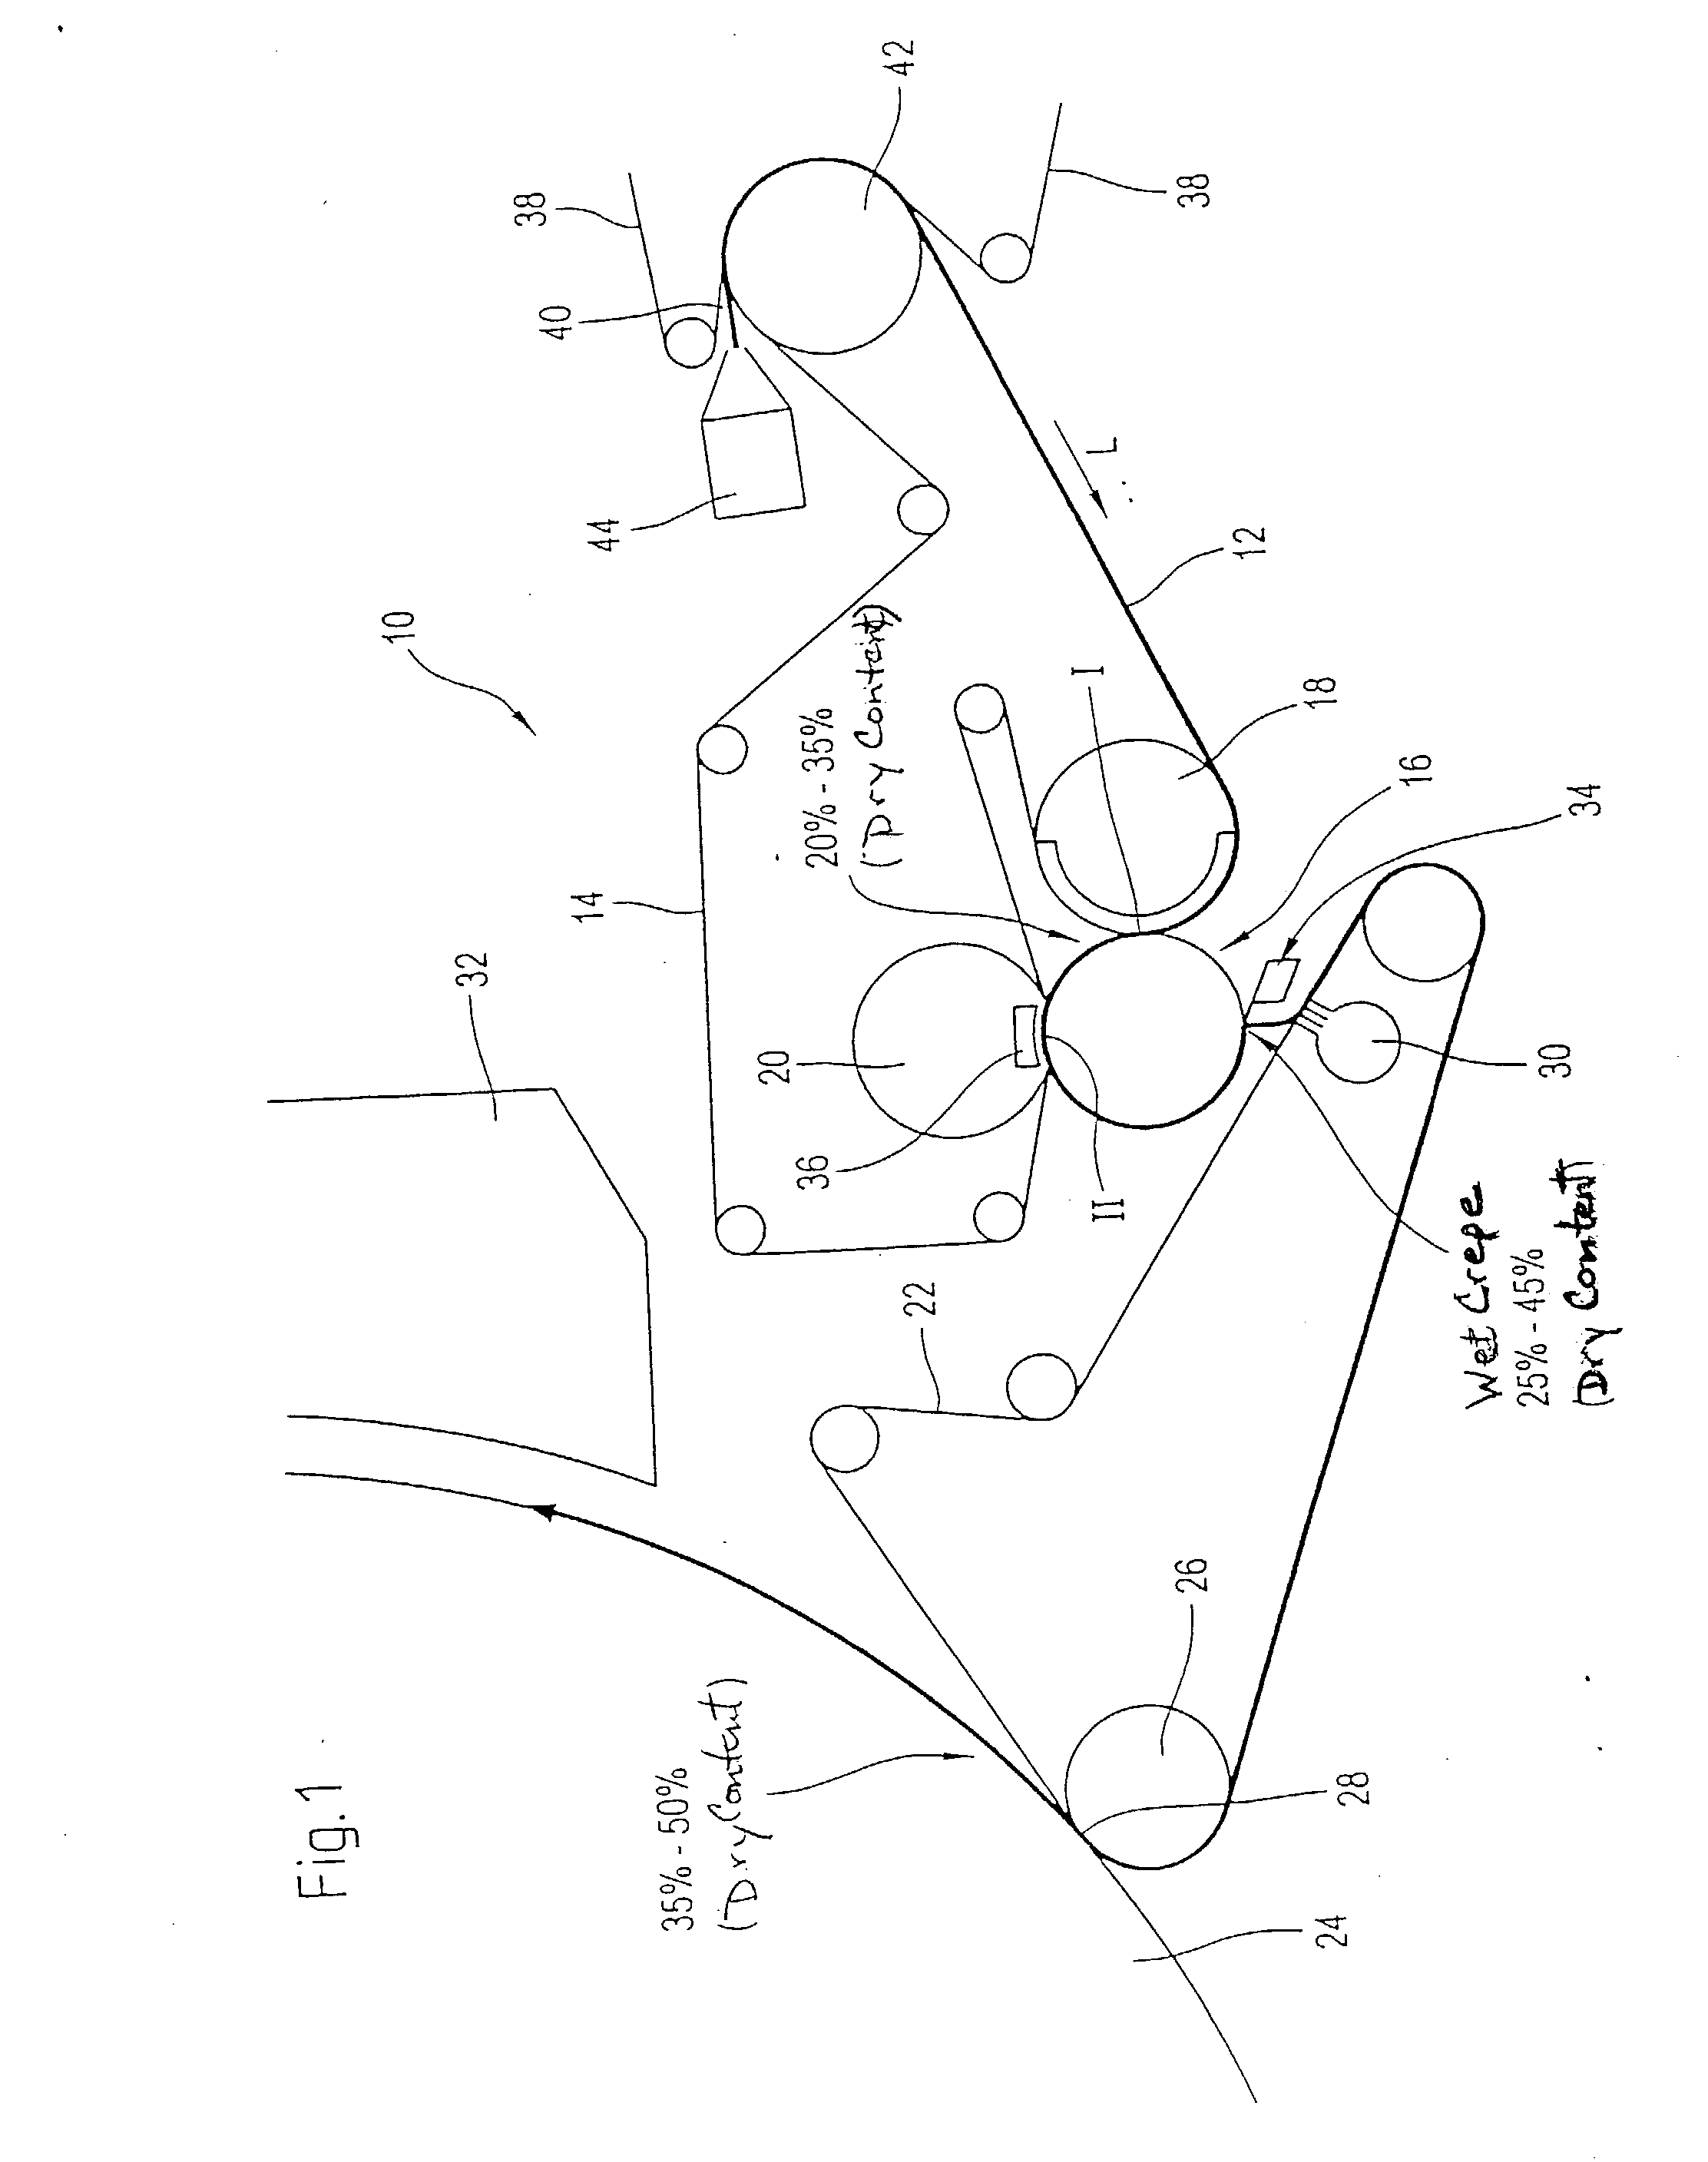 Process and apparatus for producing a fibrous web